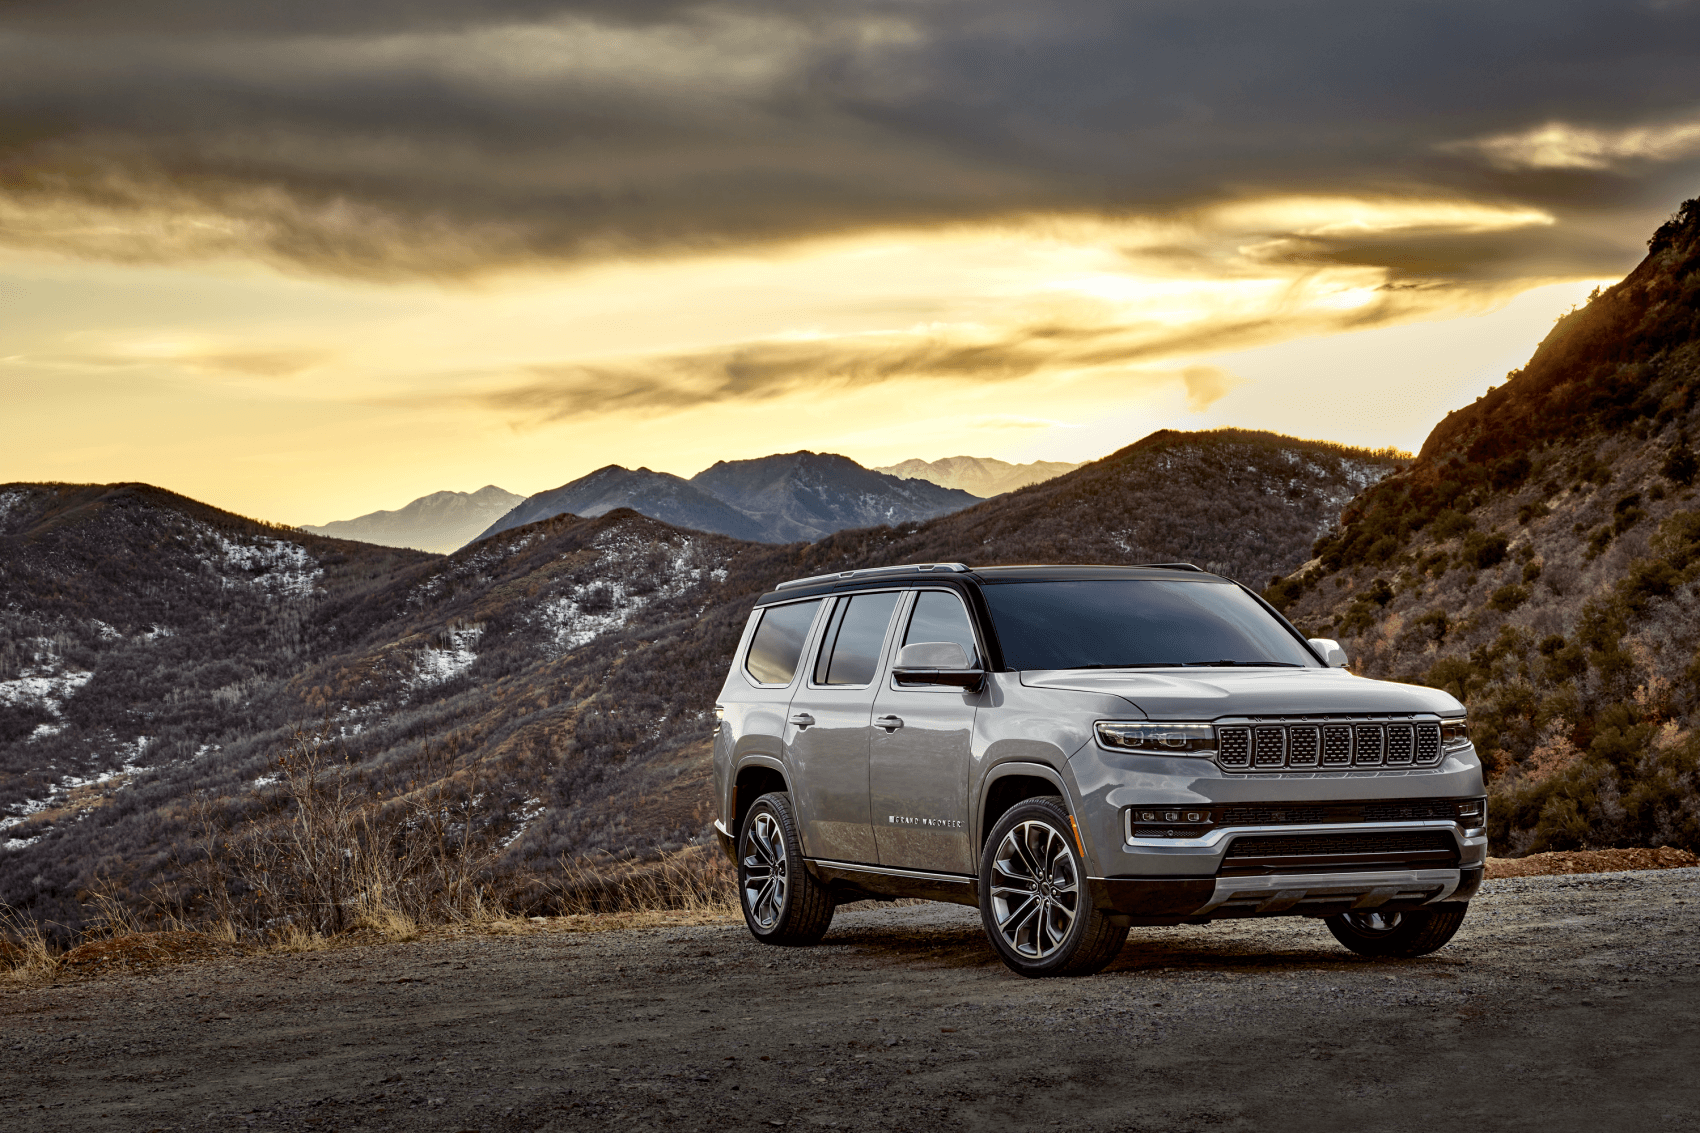 2022 Jeep Grand Wagoneer Silver Mountains